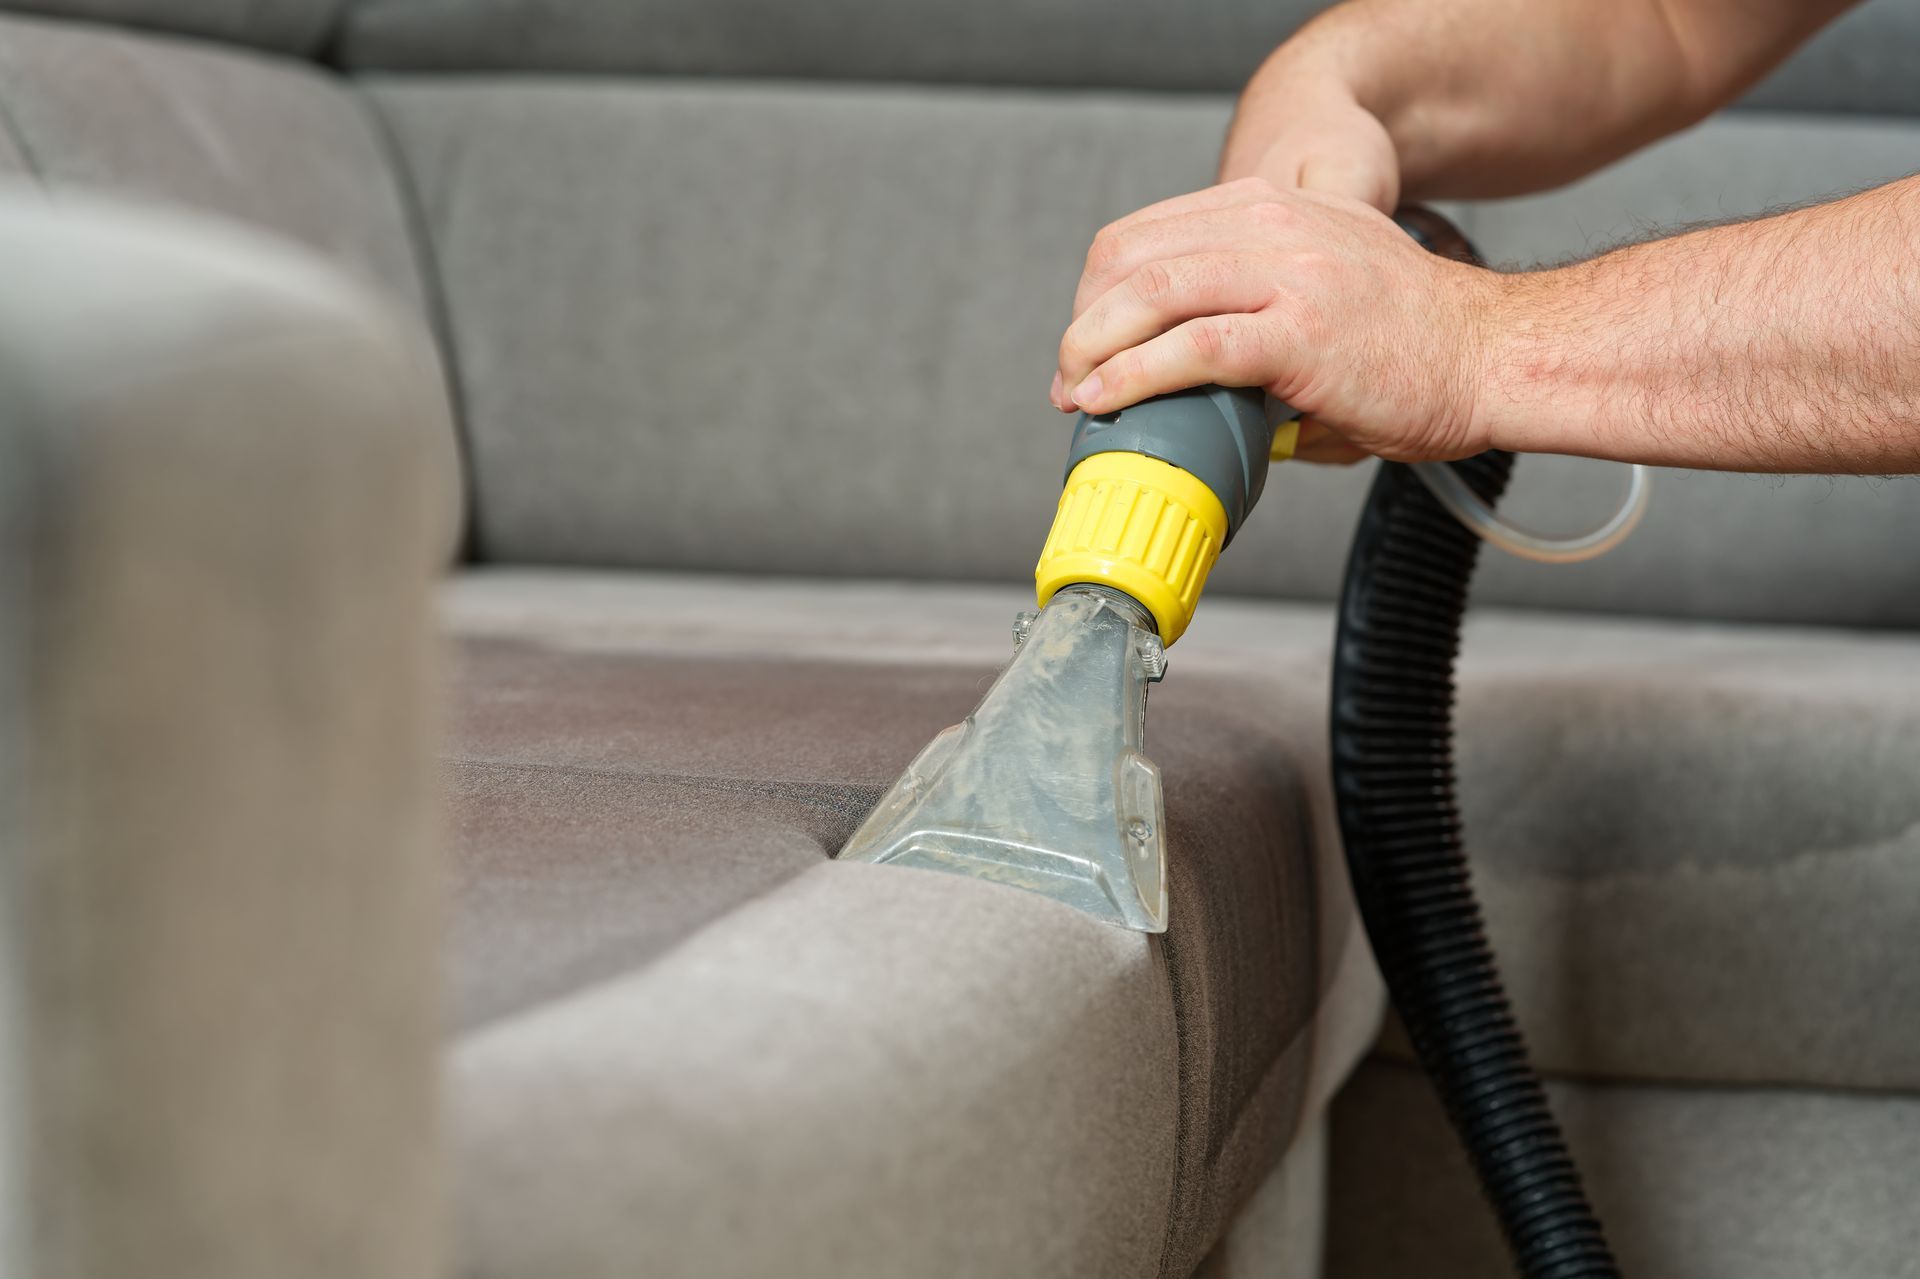 Vacuuming the Couch